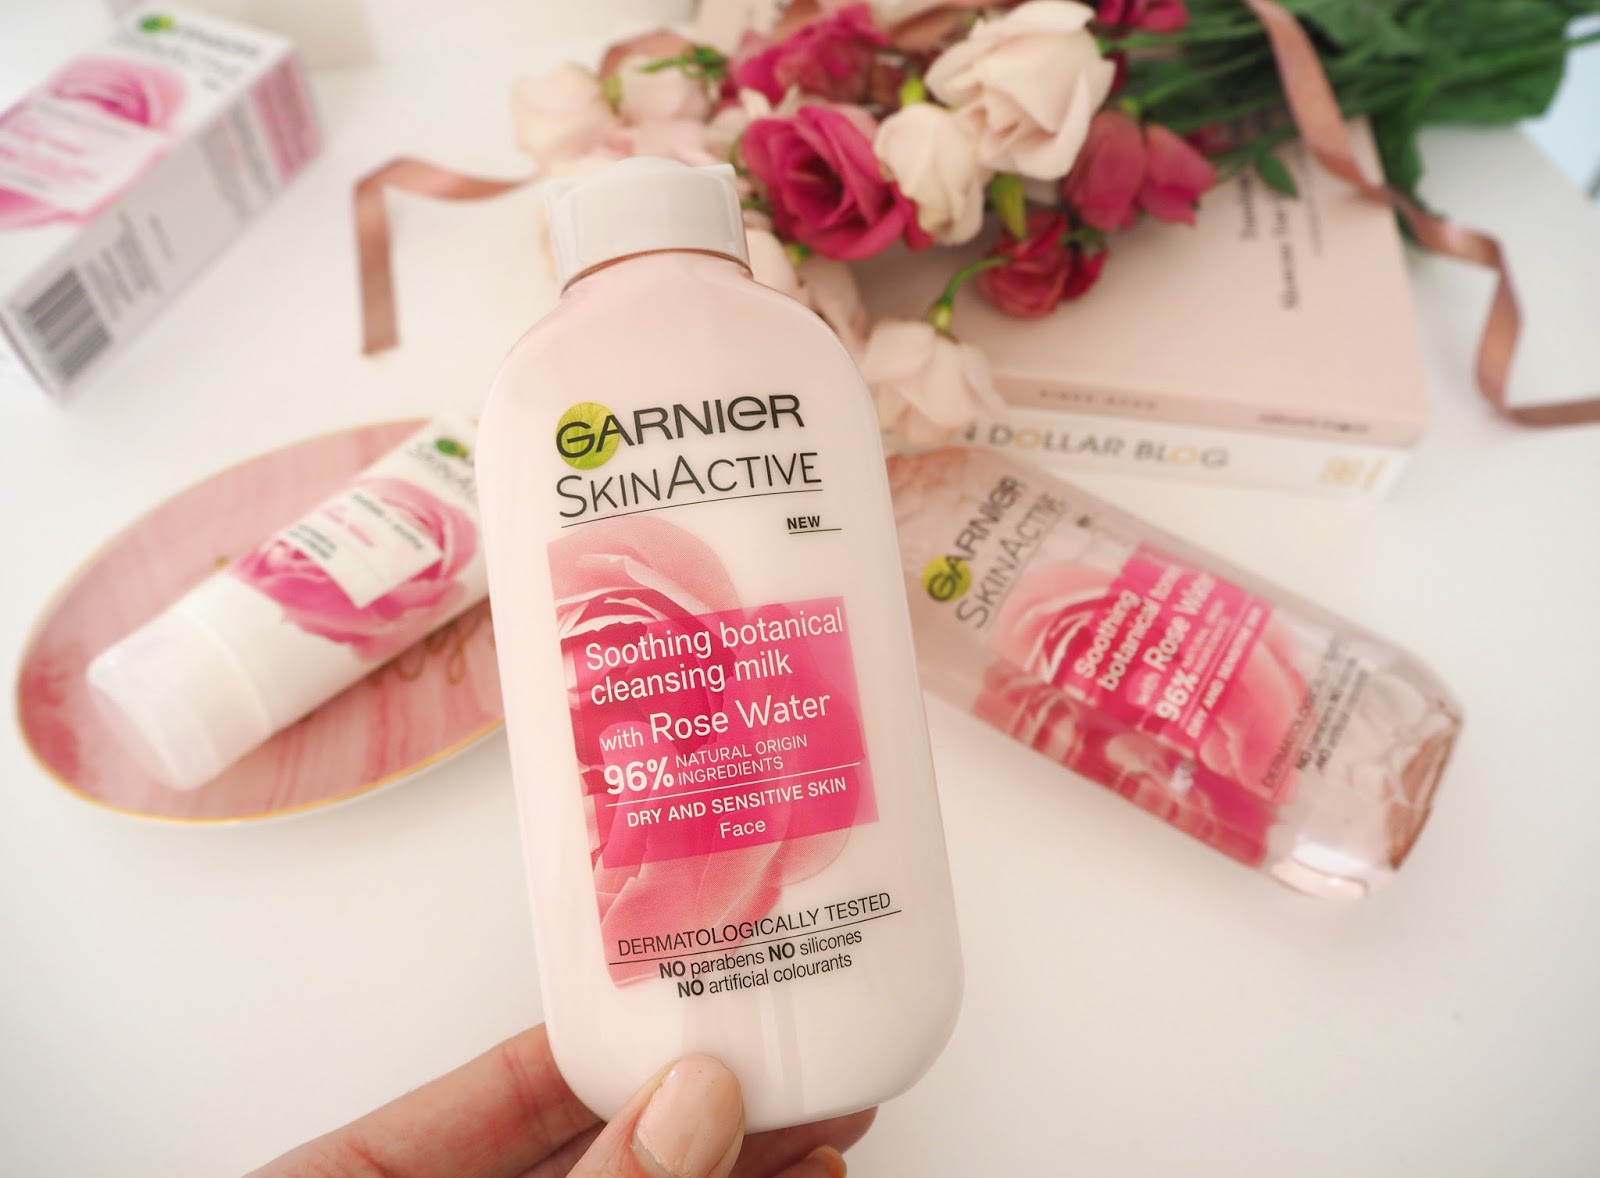 Garnier Skin Active Collection, Katie Kirk Loves, UK Blogger, Beauty Blogger, Skincare Blogger, Rose Water, Beauty Review, Skincare Review